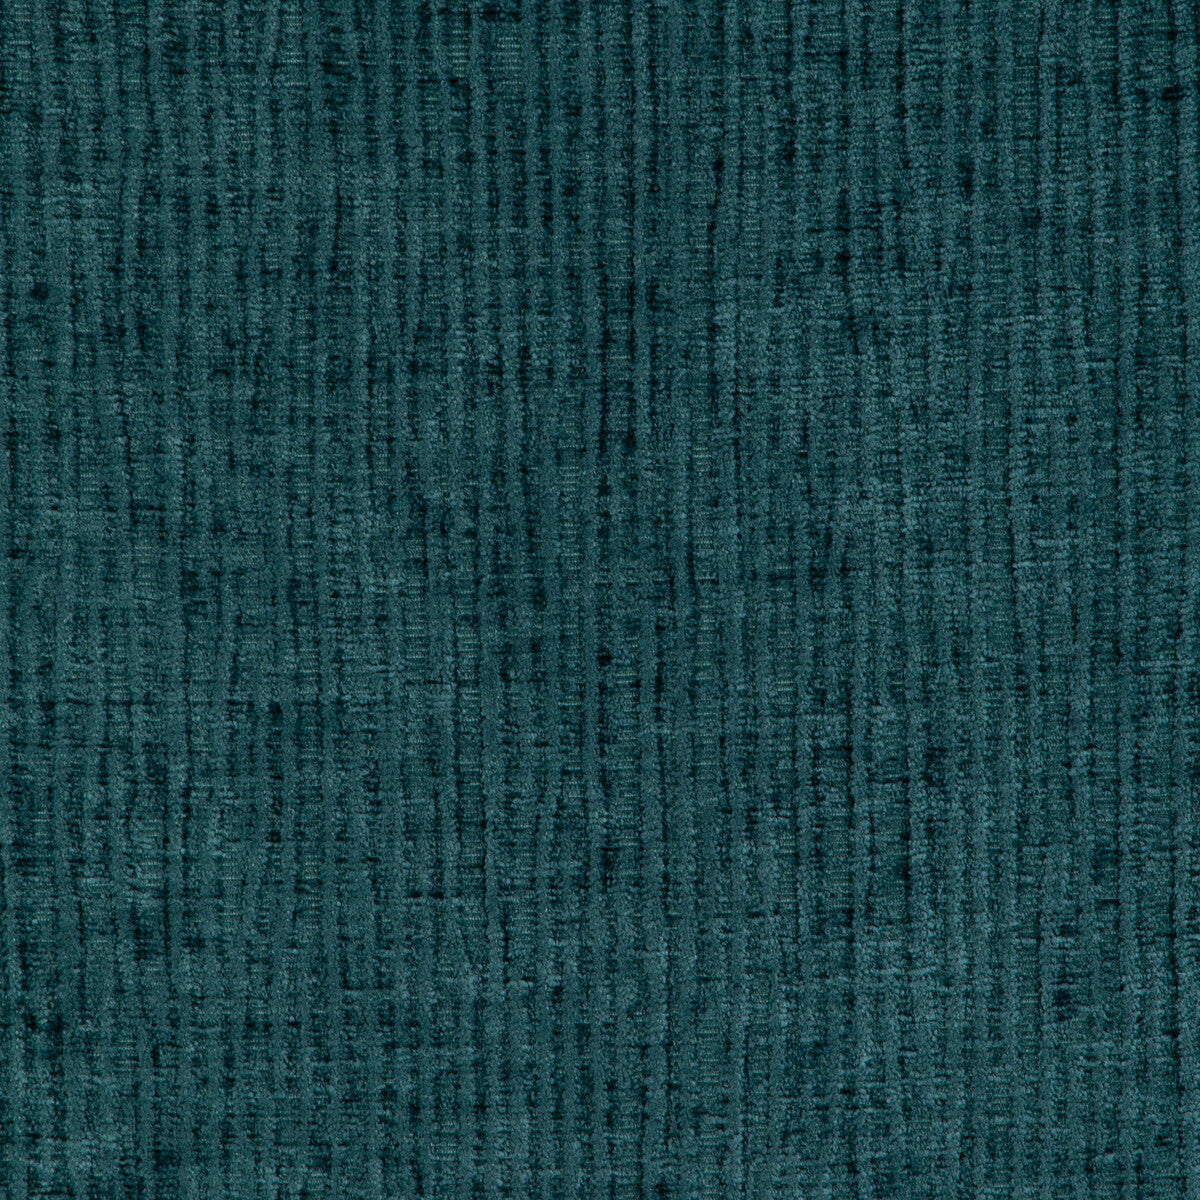 Kravet Design fabric in 37208-35 color - pattern 37208.35.0 - by Kravet Design in the Woven Colors collection